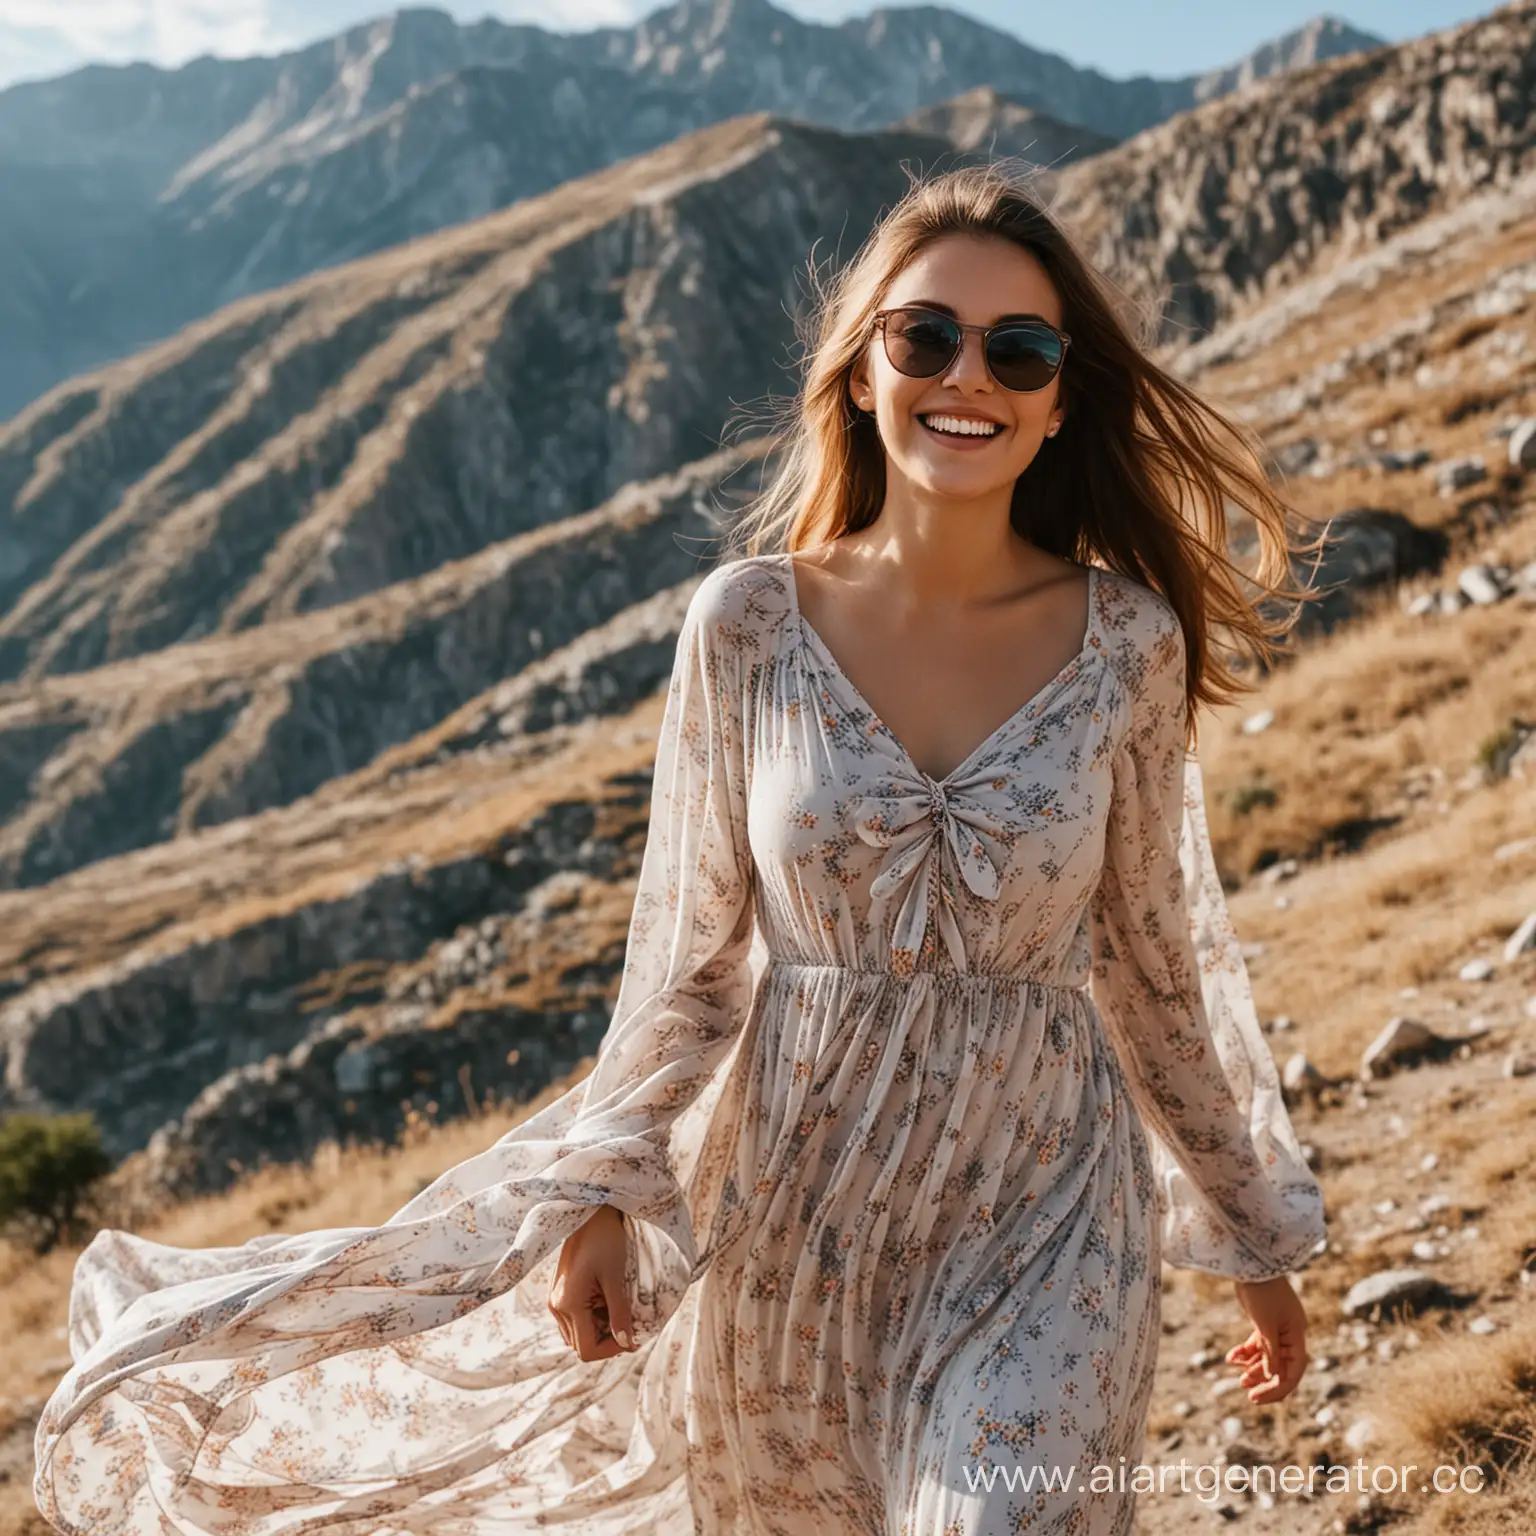 Mountain-Beauty-Smiling-Woman-in-Flowing-Dress-with-Sunglasses